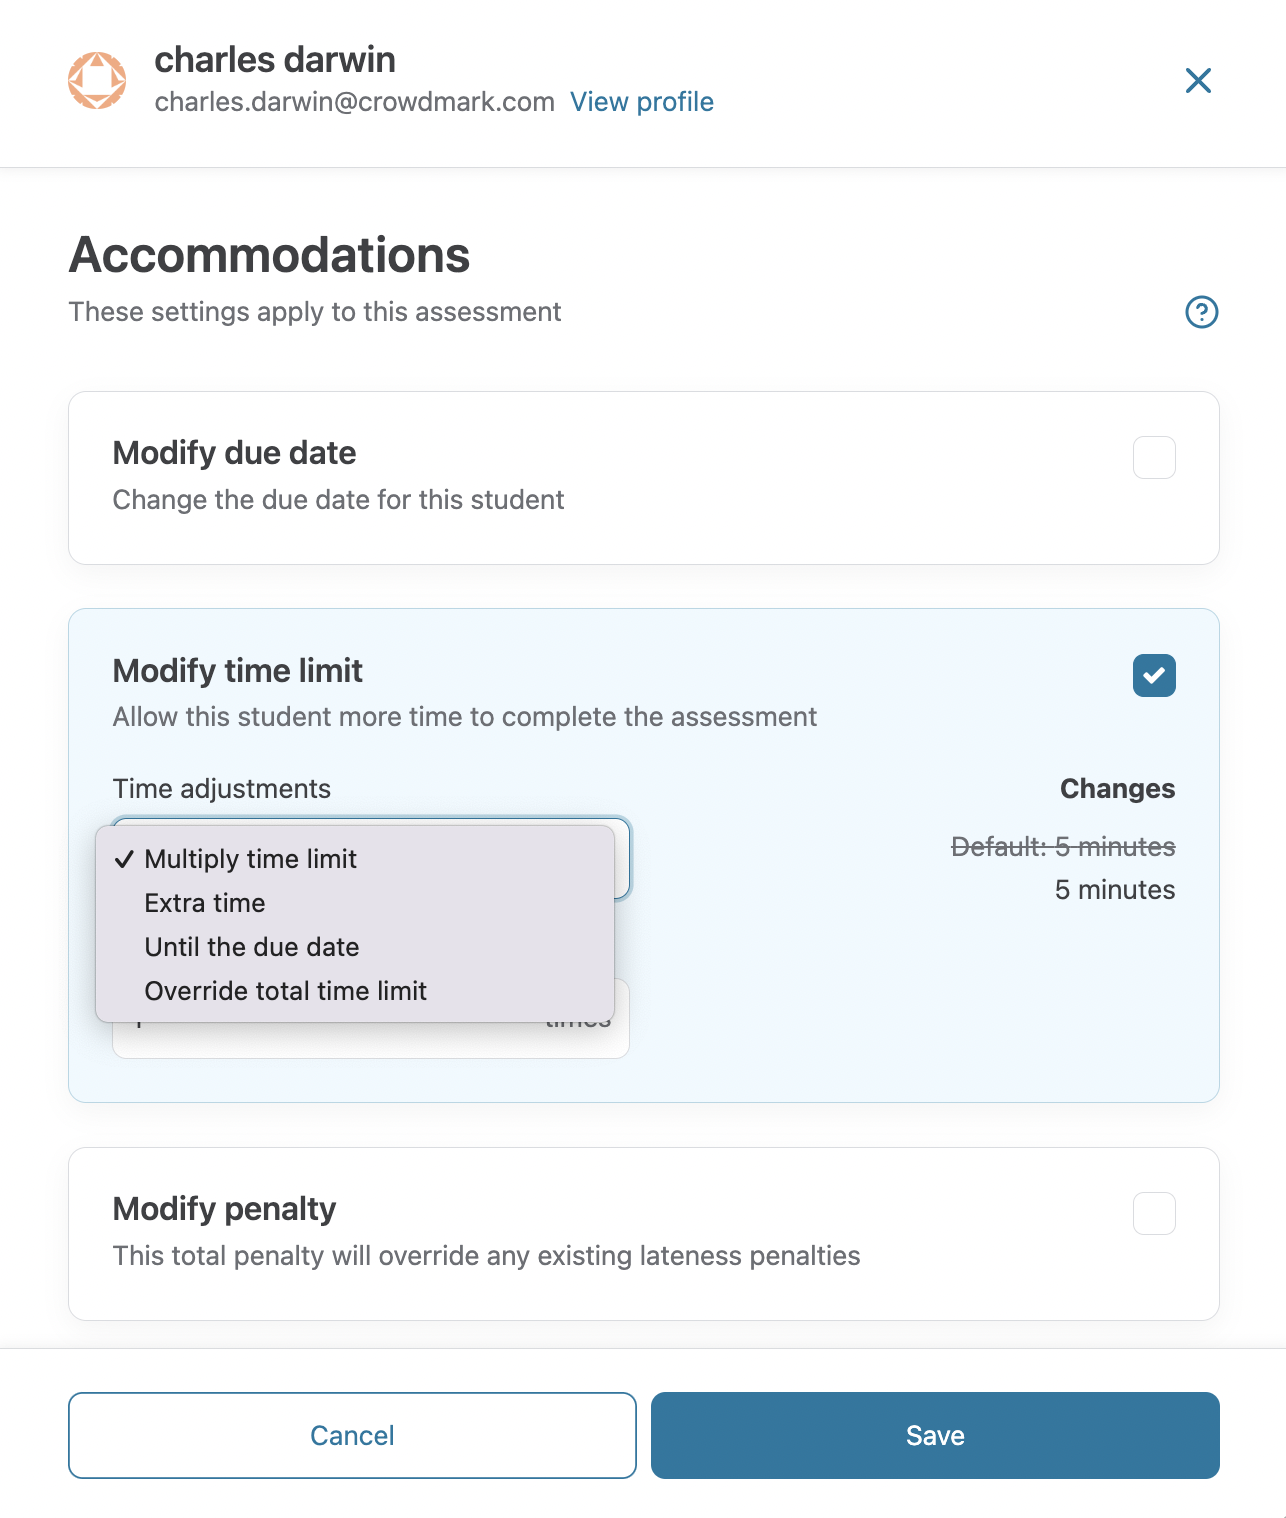 Accommodations panel open with modify time limit selected.